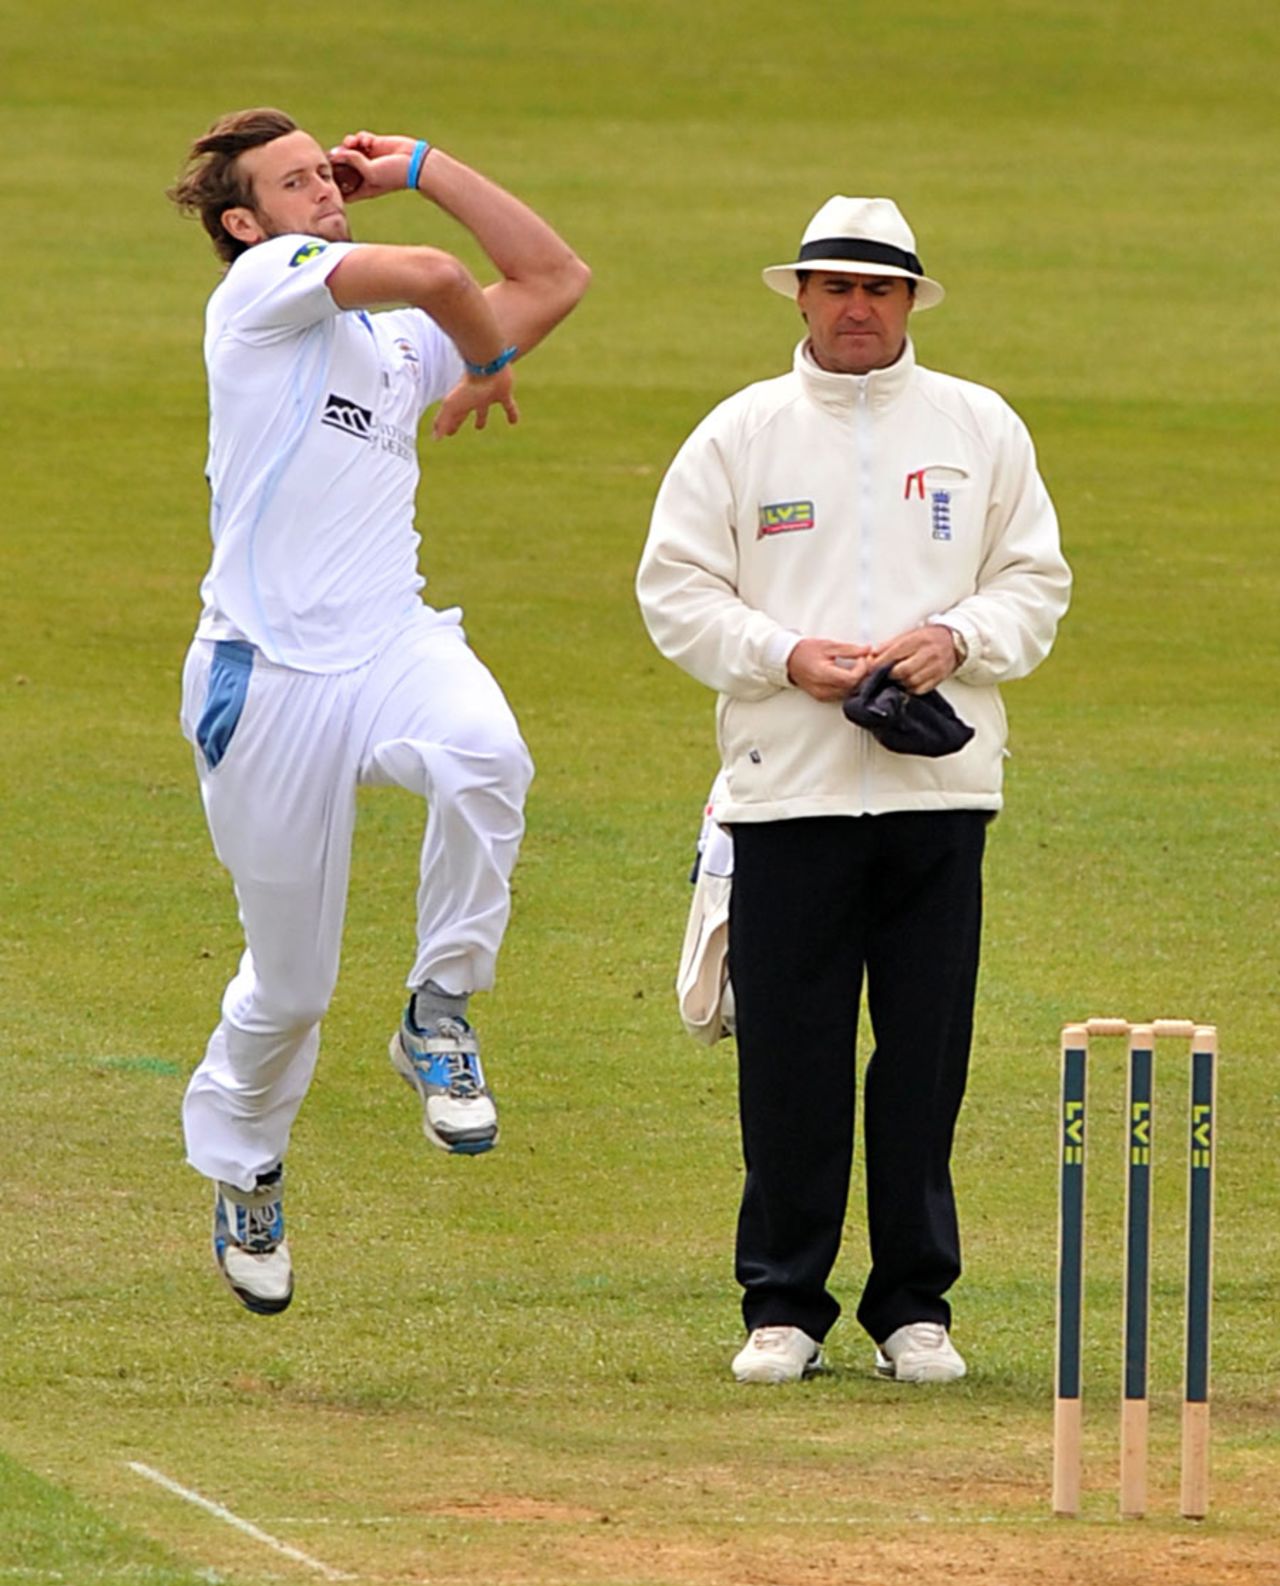 Ross Whiteley in his delivery stride, Derbyshire v Nottinghamshire, County Championship, Division One, Derby, 2nd day, April 25, 2013